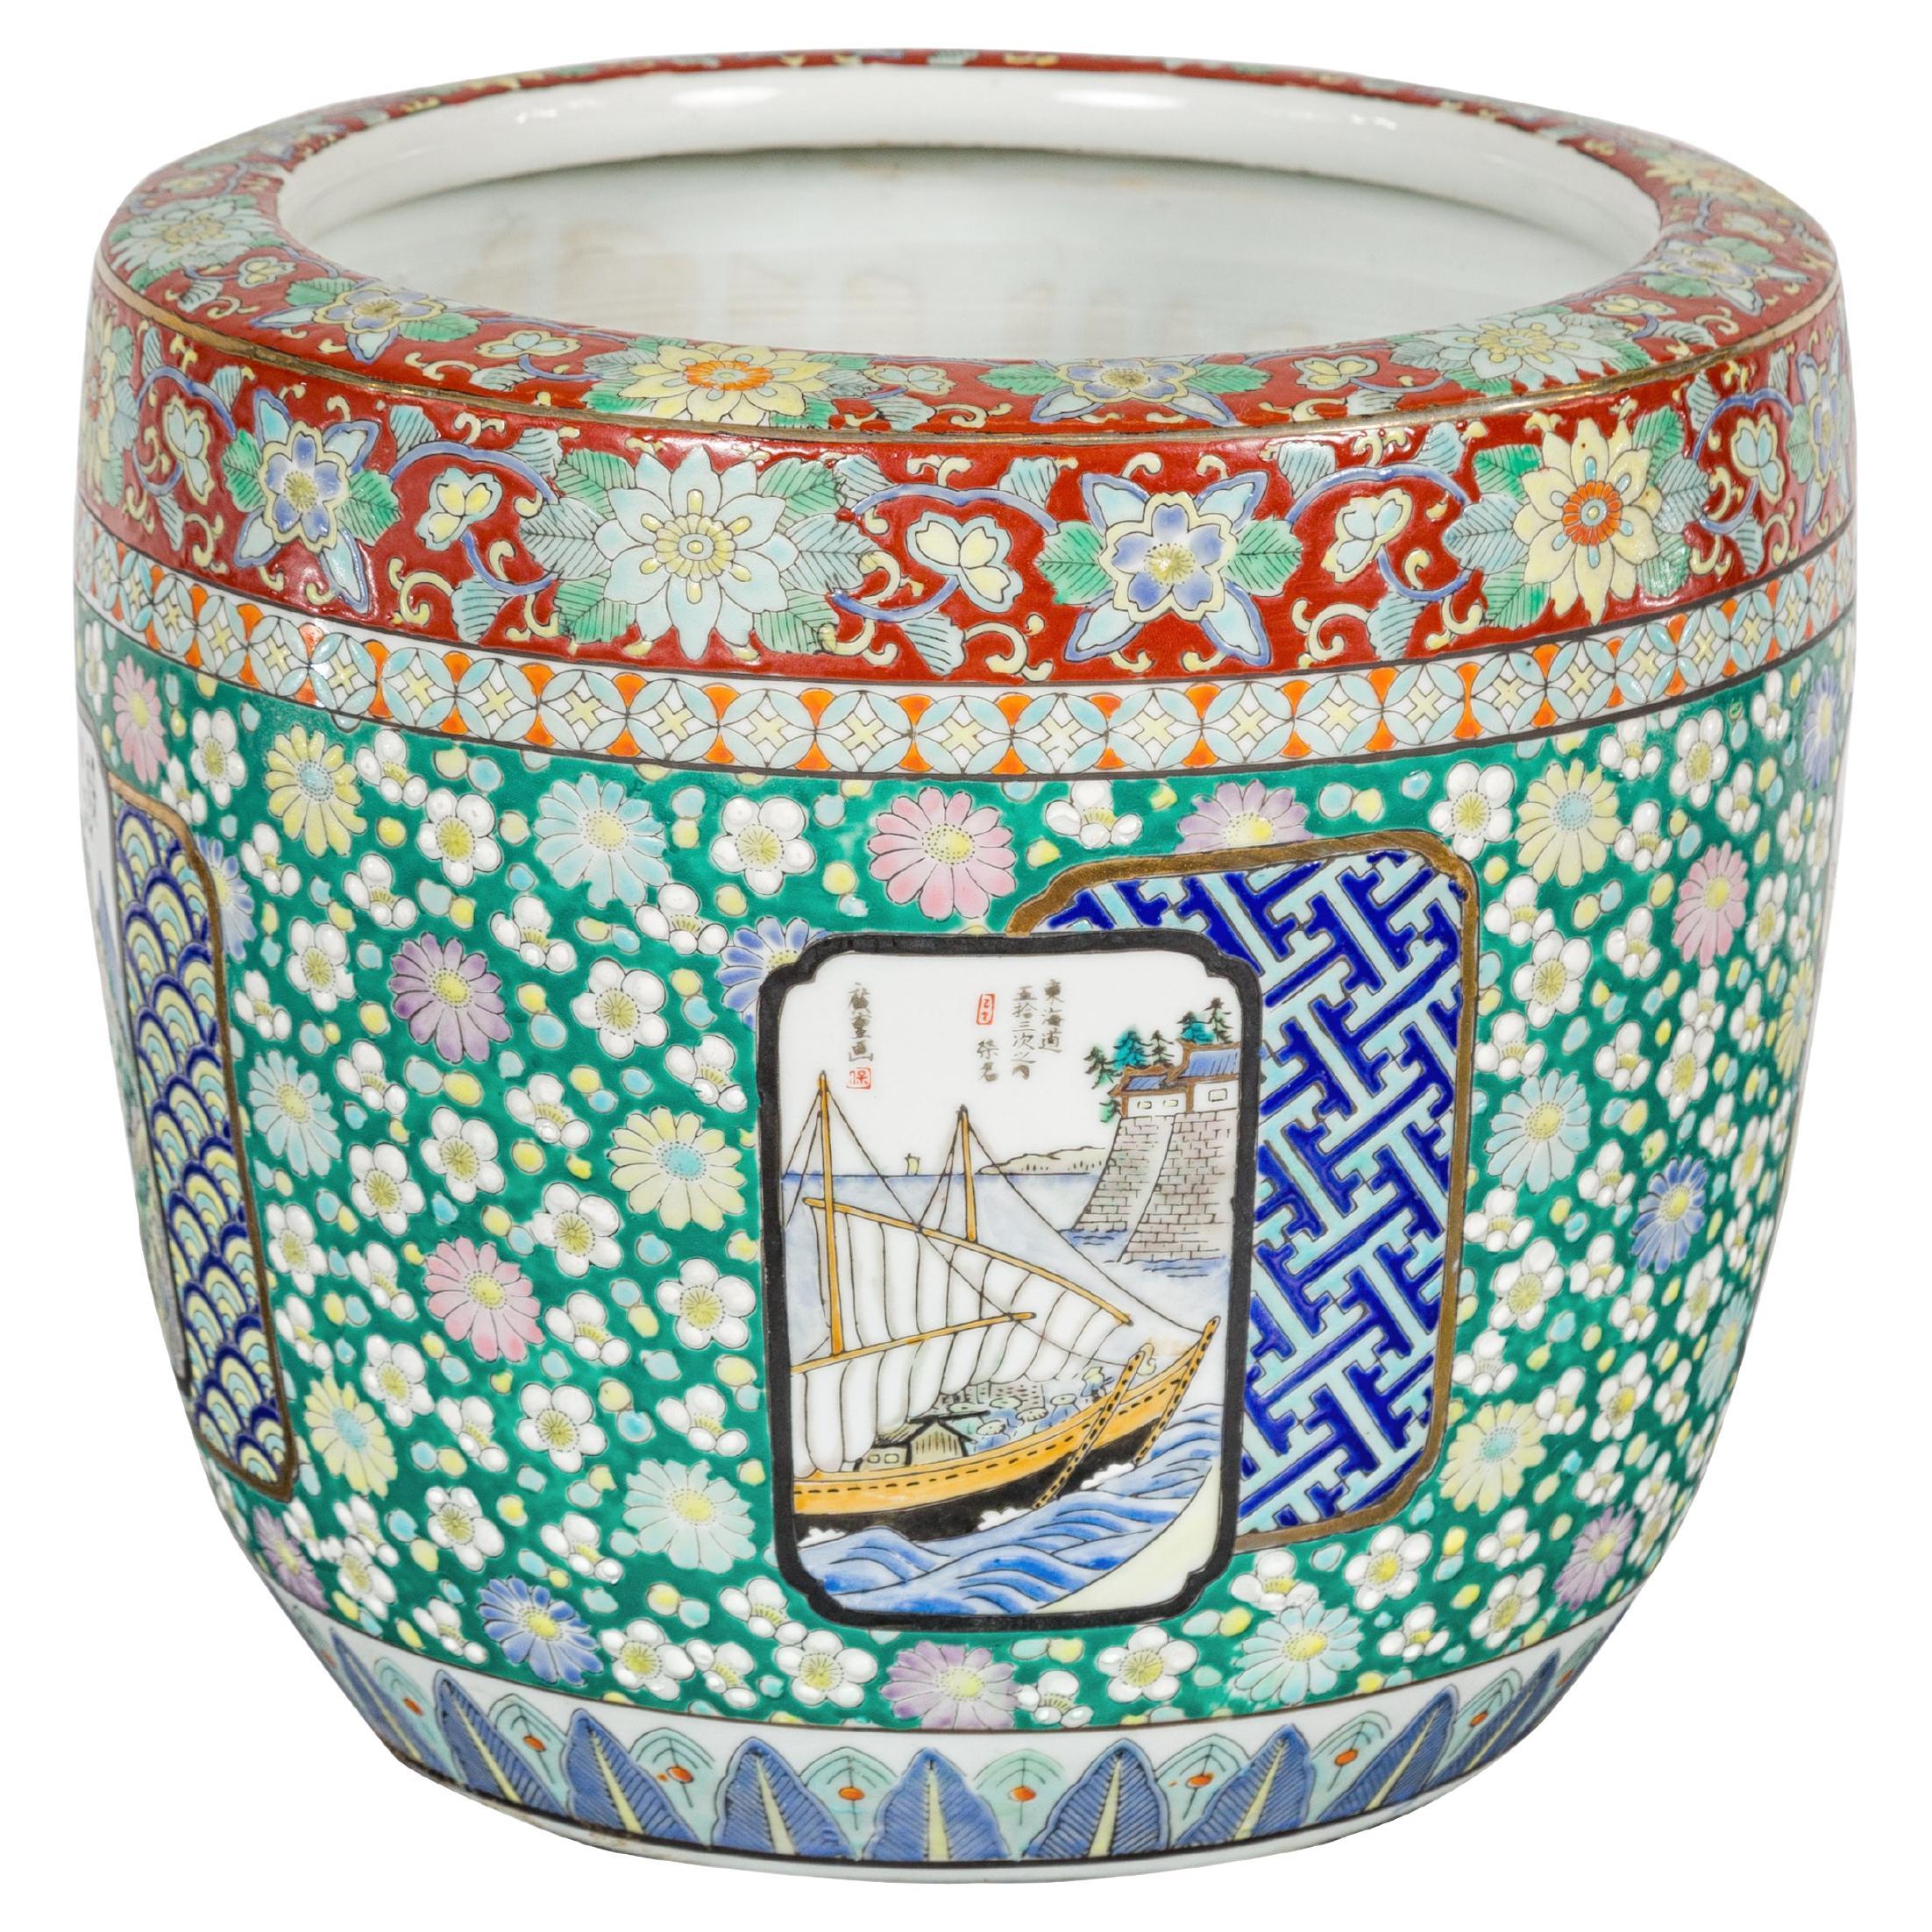 Japanese Hand-Painted Imari Planter with Boat, Mountains, People and Flowers For Sale